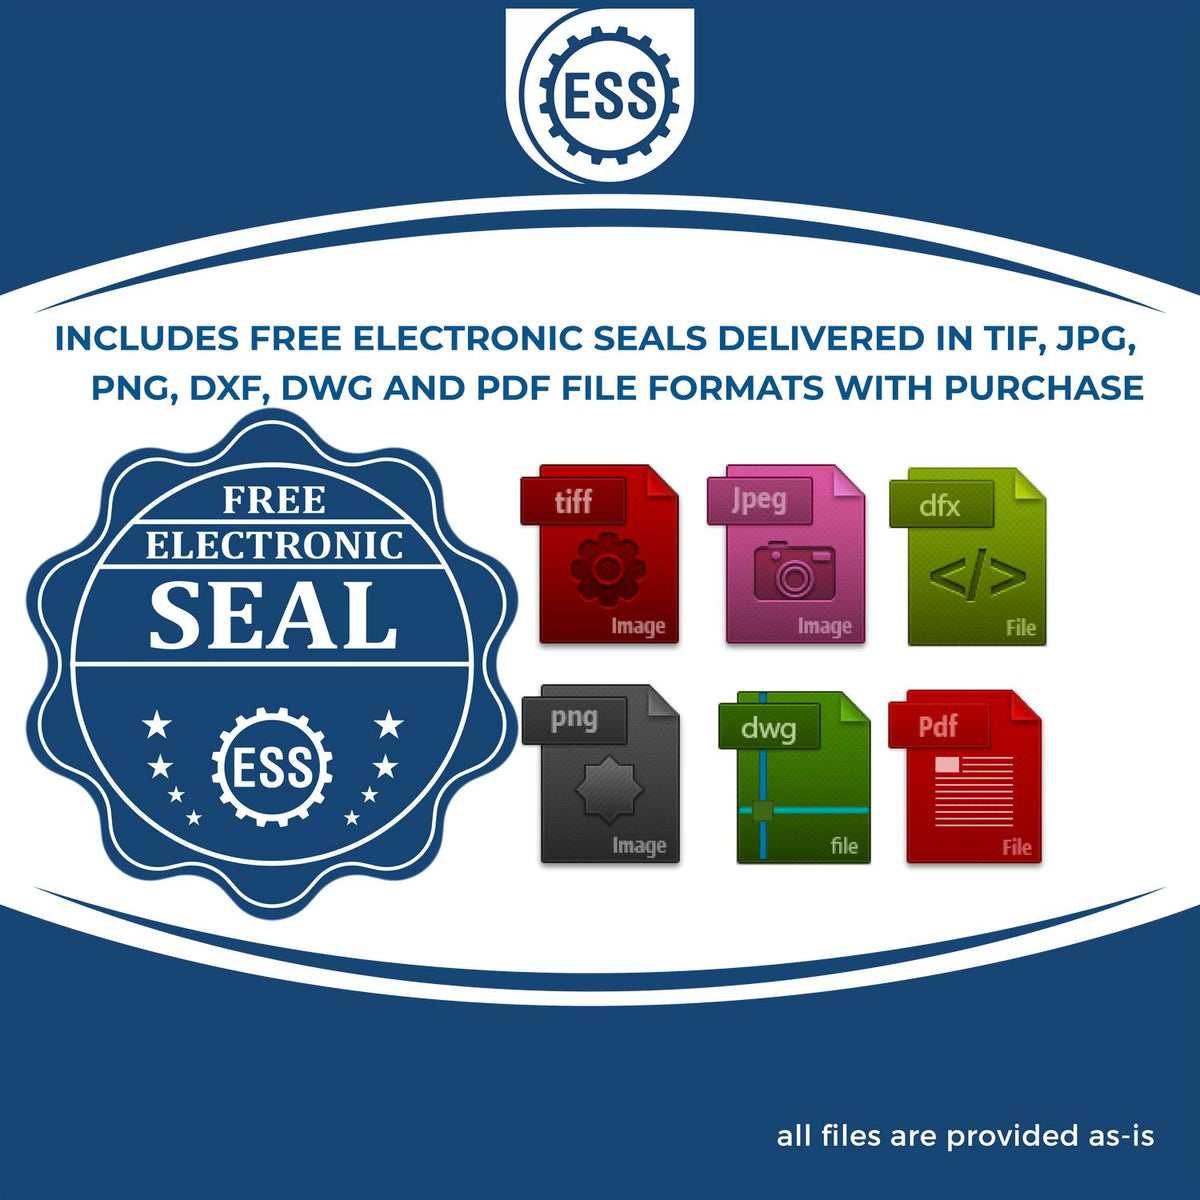 An infographic for the free electronic seal for the Self-Inking Kansas PE Stamp illustrating the different file type icons such as DXF, DWG, TIF, JPG and PNG.